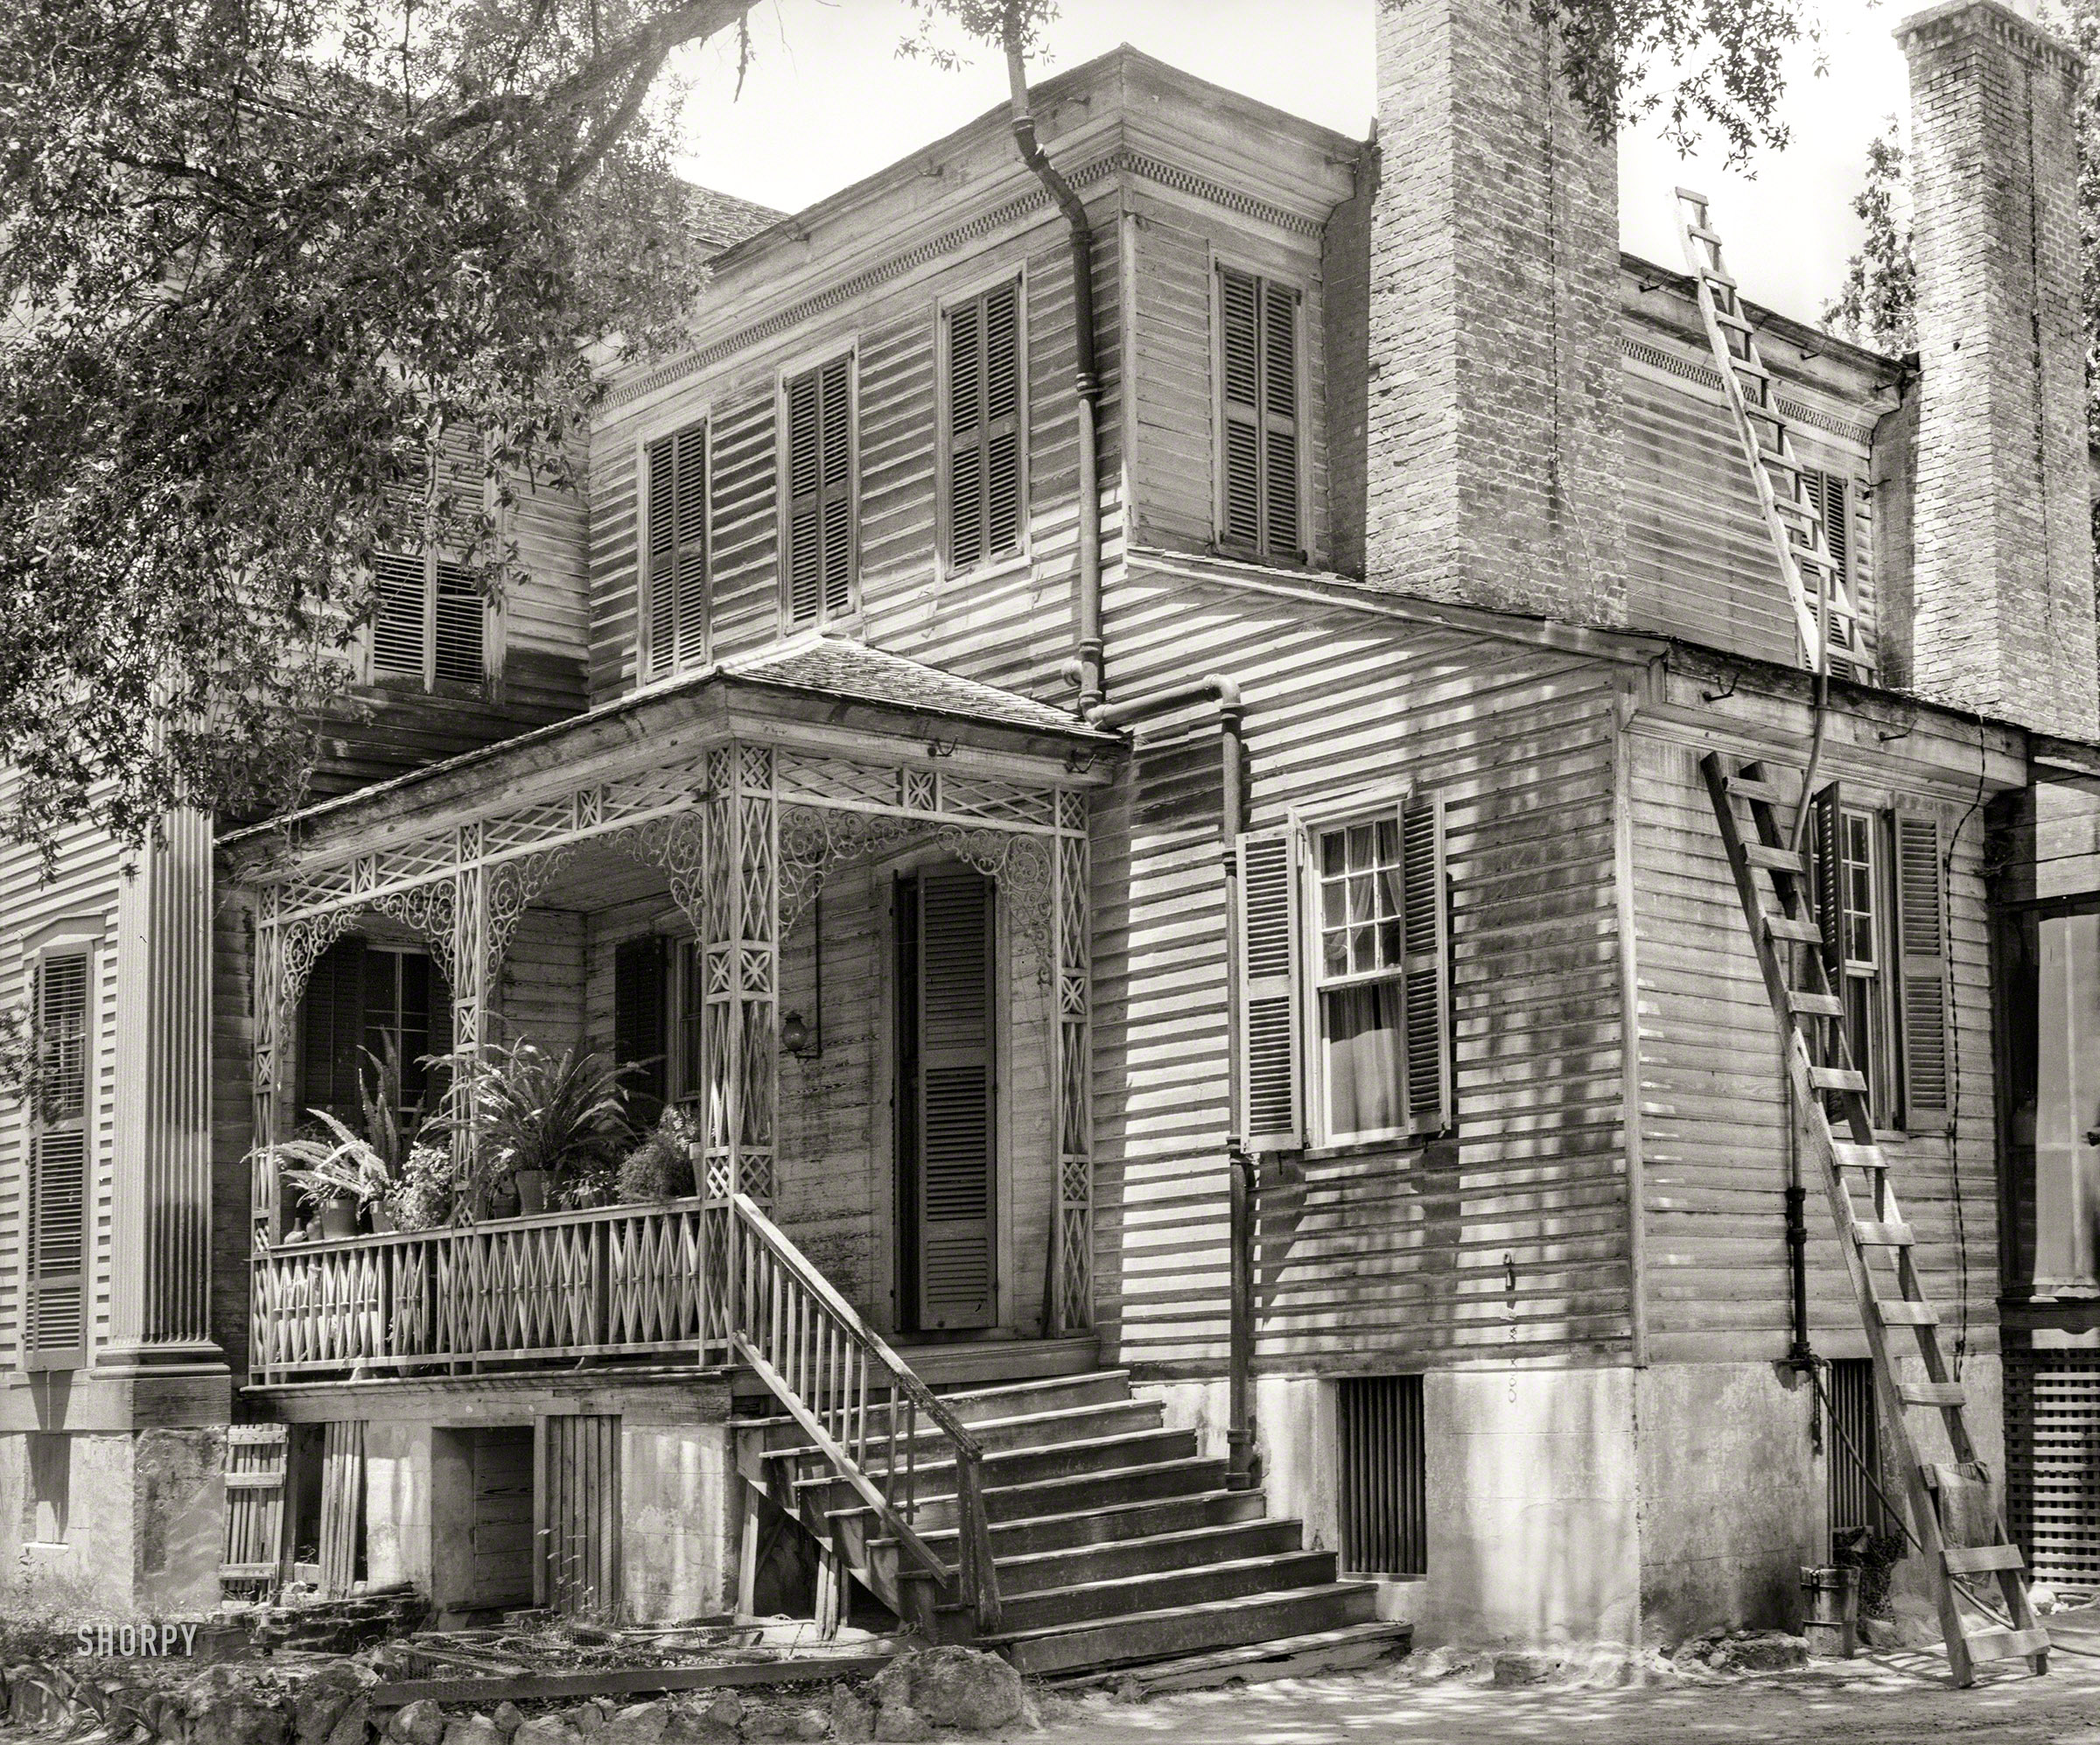 November 1939. "Old house in Holmes County, Mississippi." Medium format negative by Marion Post Wolcott for the Farm Security Administration. View full size.